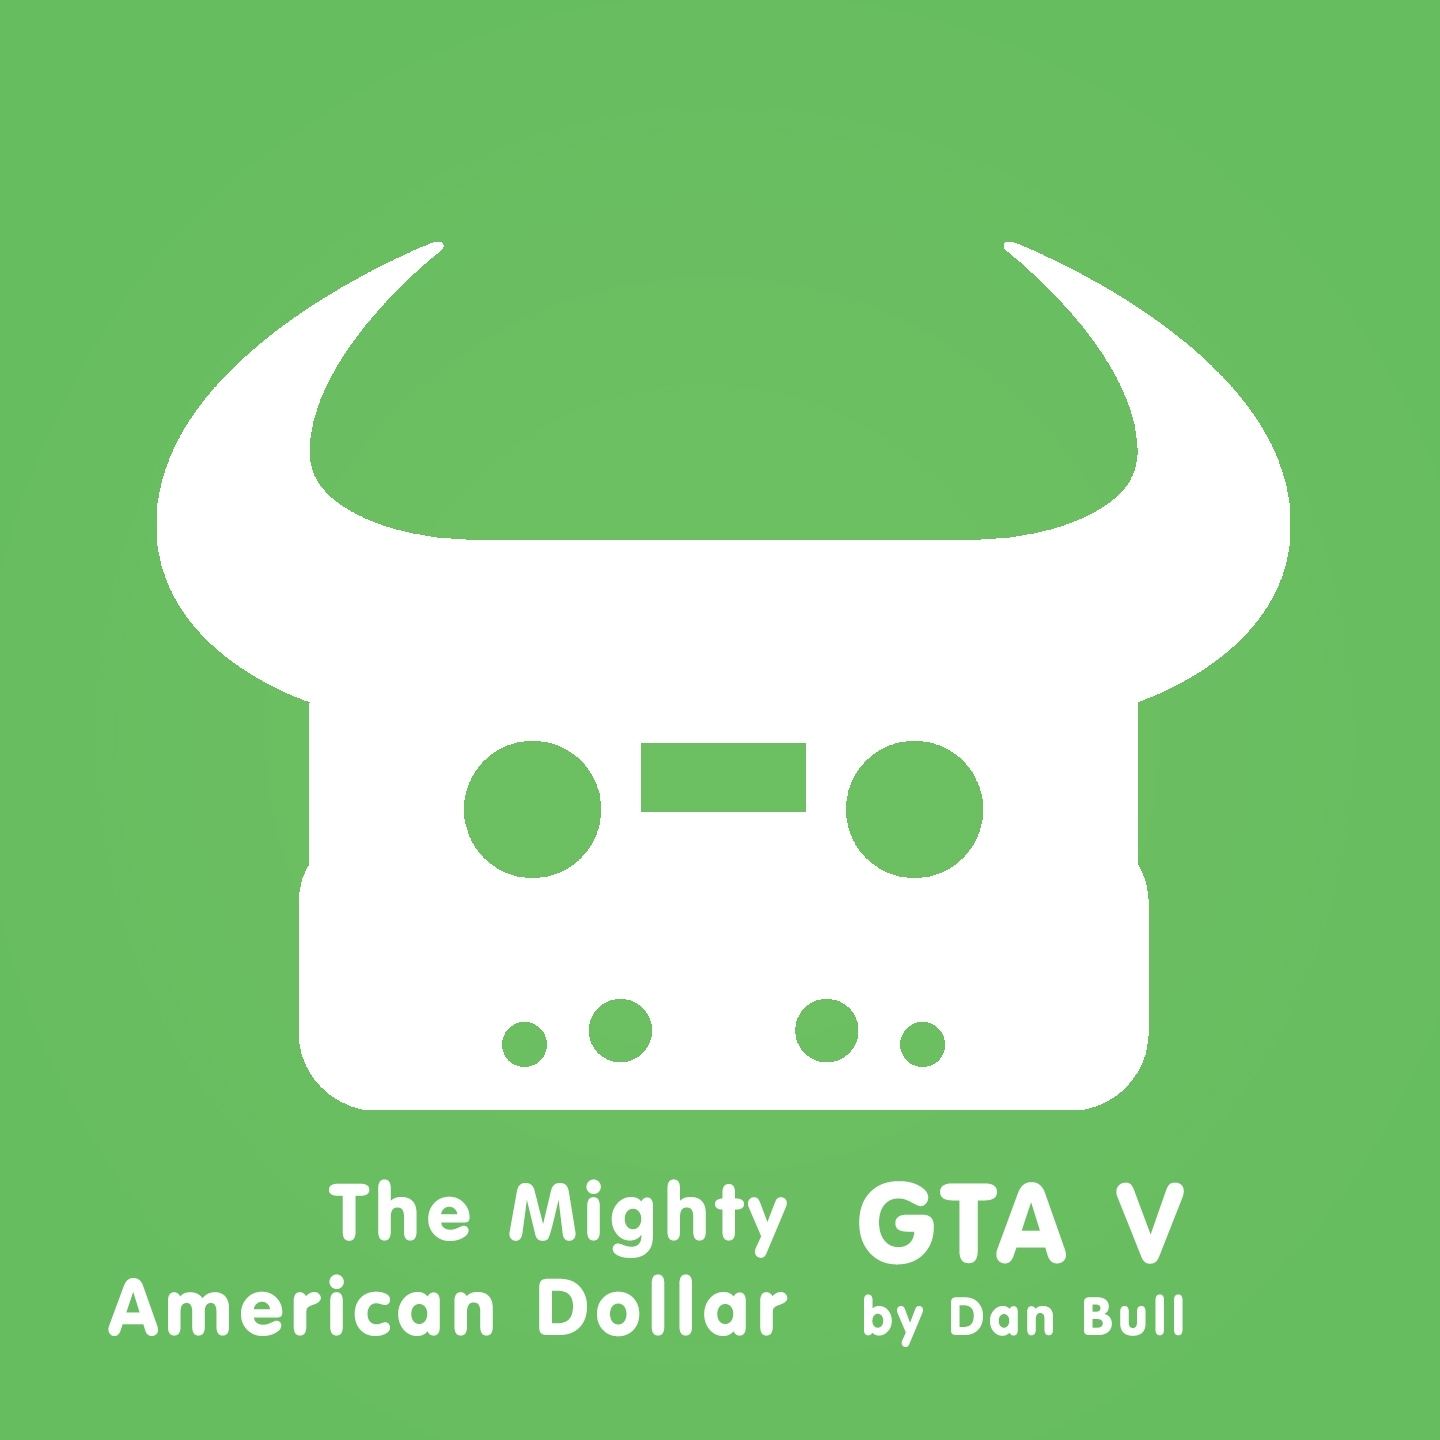 Grand Theft Auto V: The Mighty American Dollar (Instrumental)